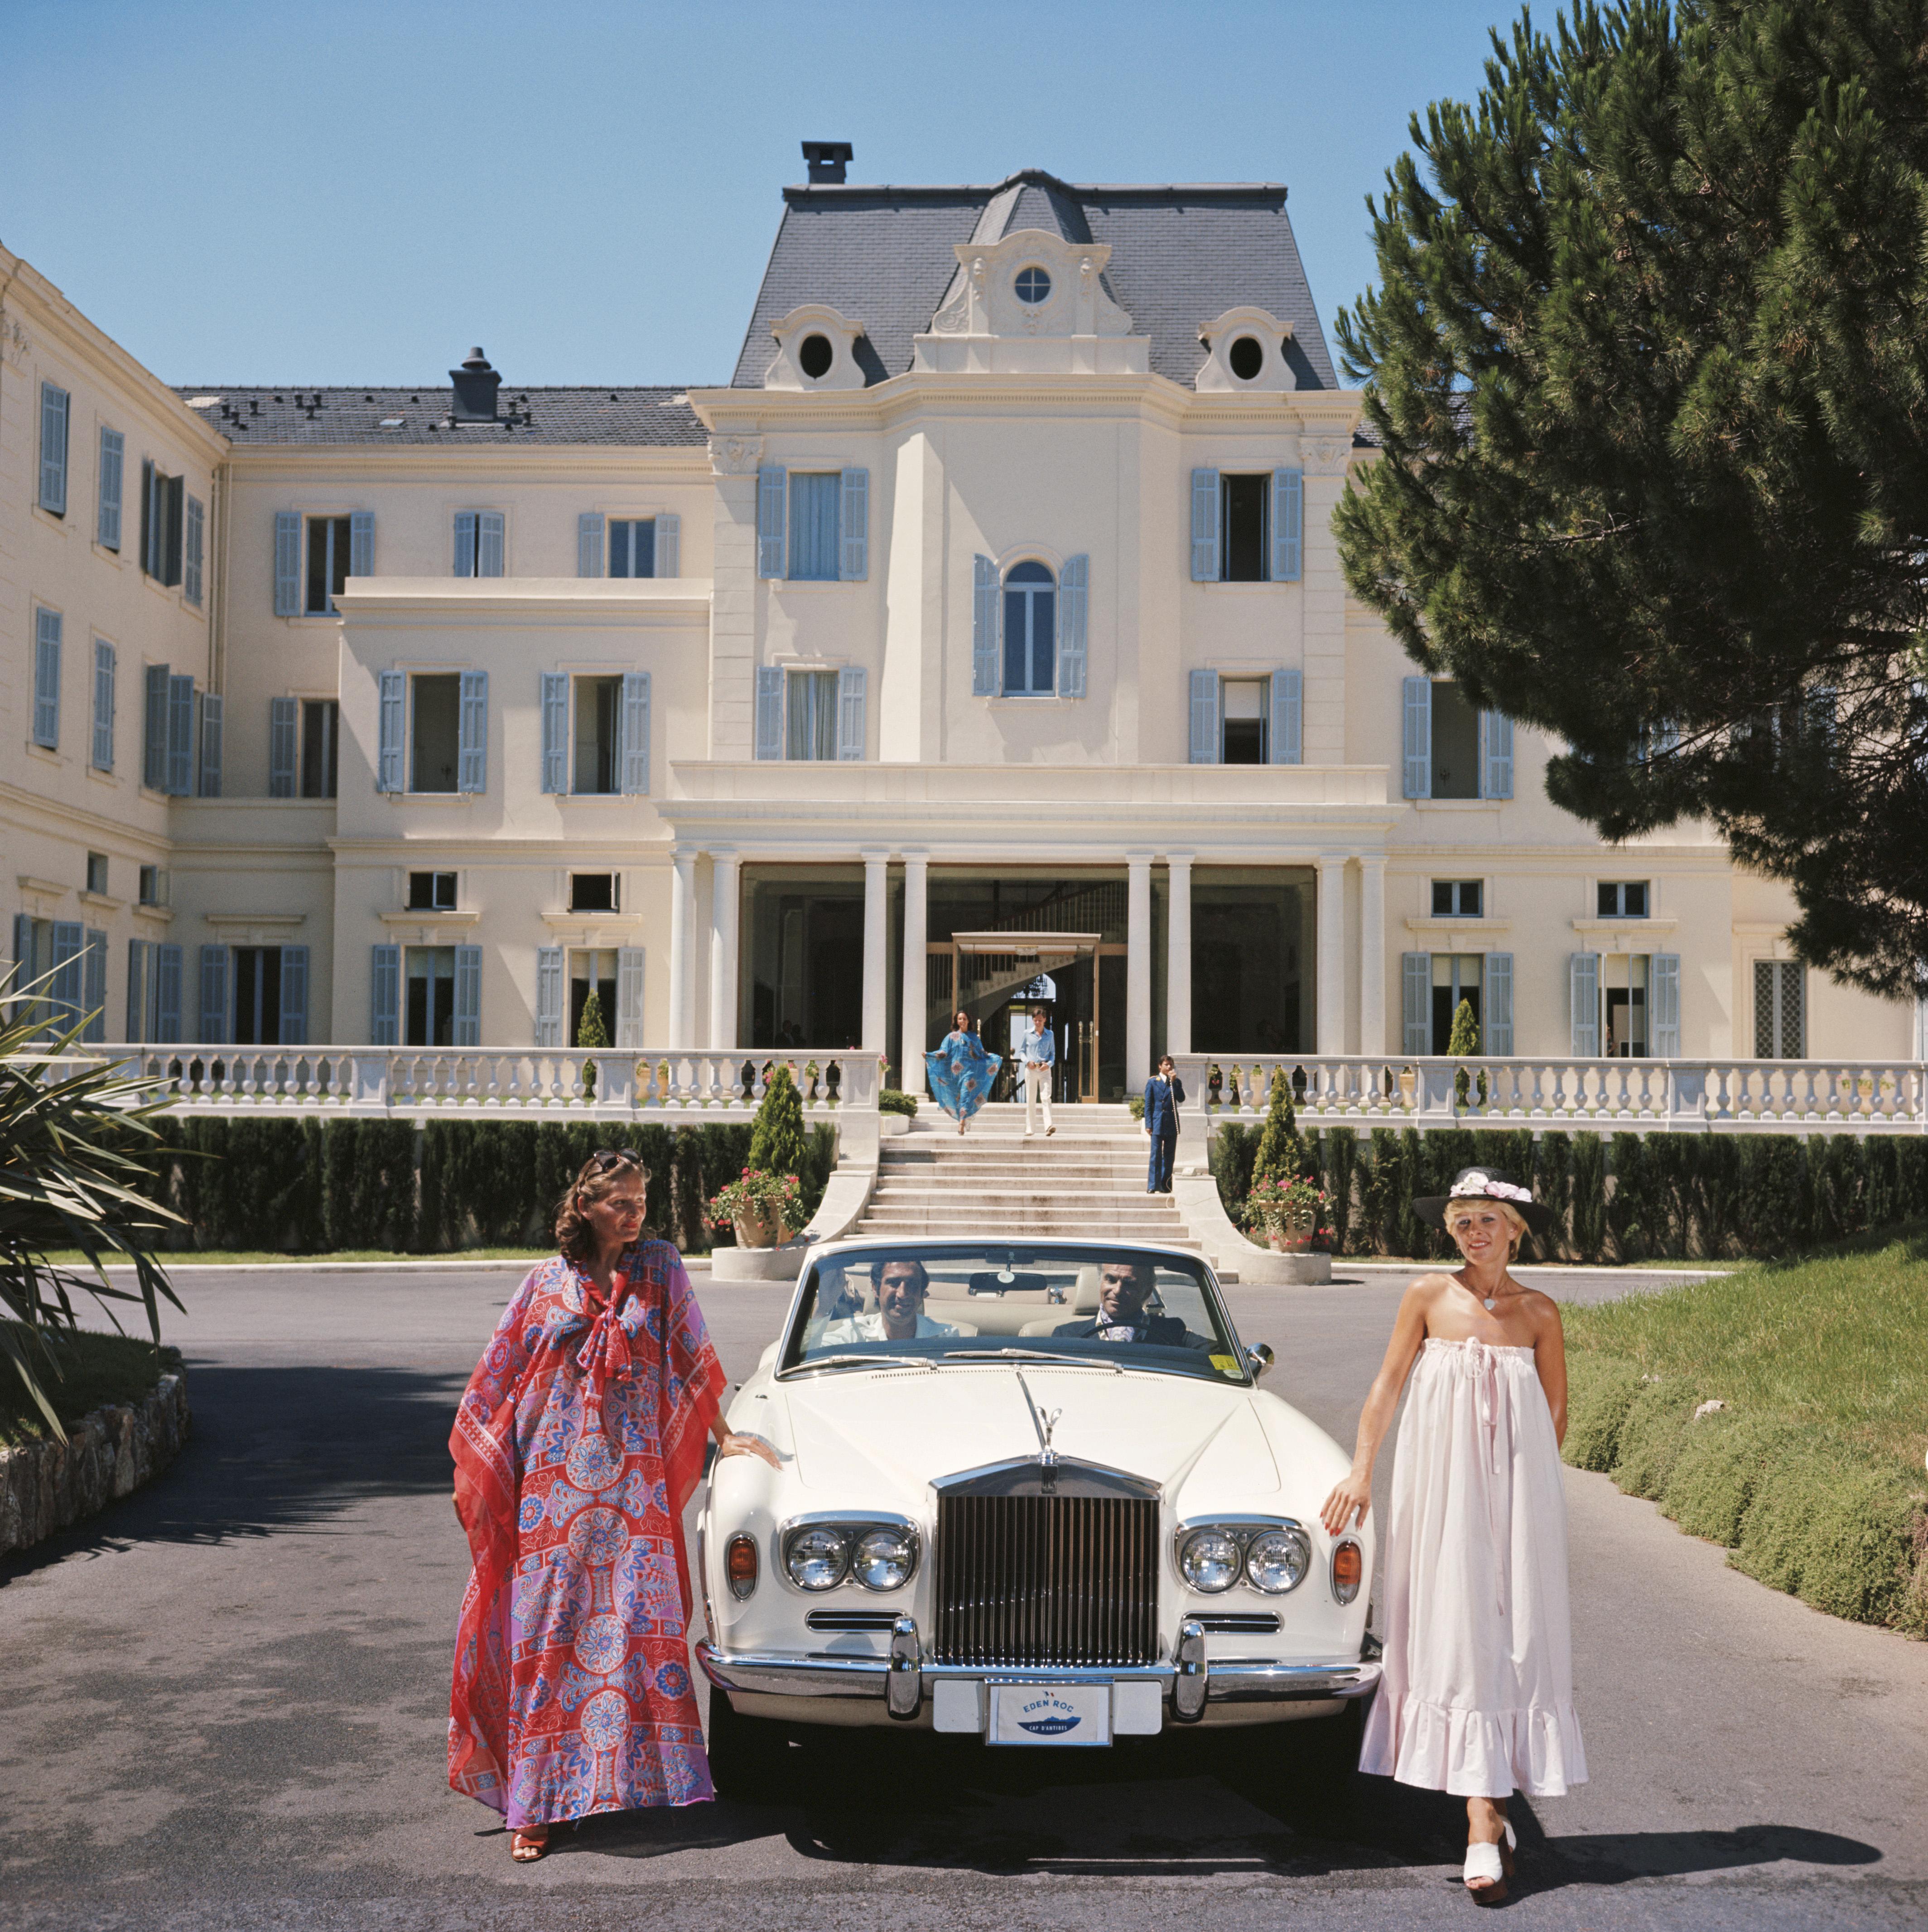 Hotel du Cap-Eden-Roc
1976
C print
30 x 30 inches
Estate stamped and hand numbered edition of 150 with certificate of authenticity from the estate.   

Guests standing by a white Rolls-Royce convertible courtesy car at the Hotel du Cap-Eden-Roc,